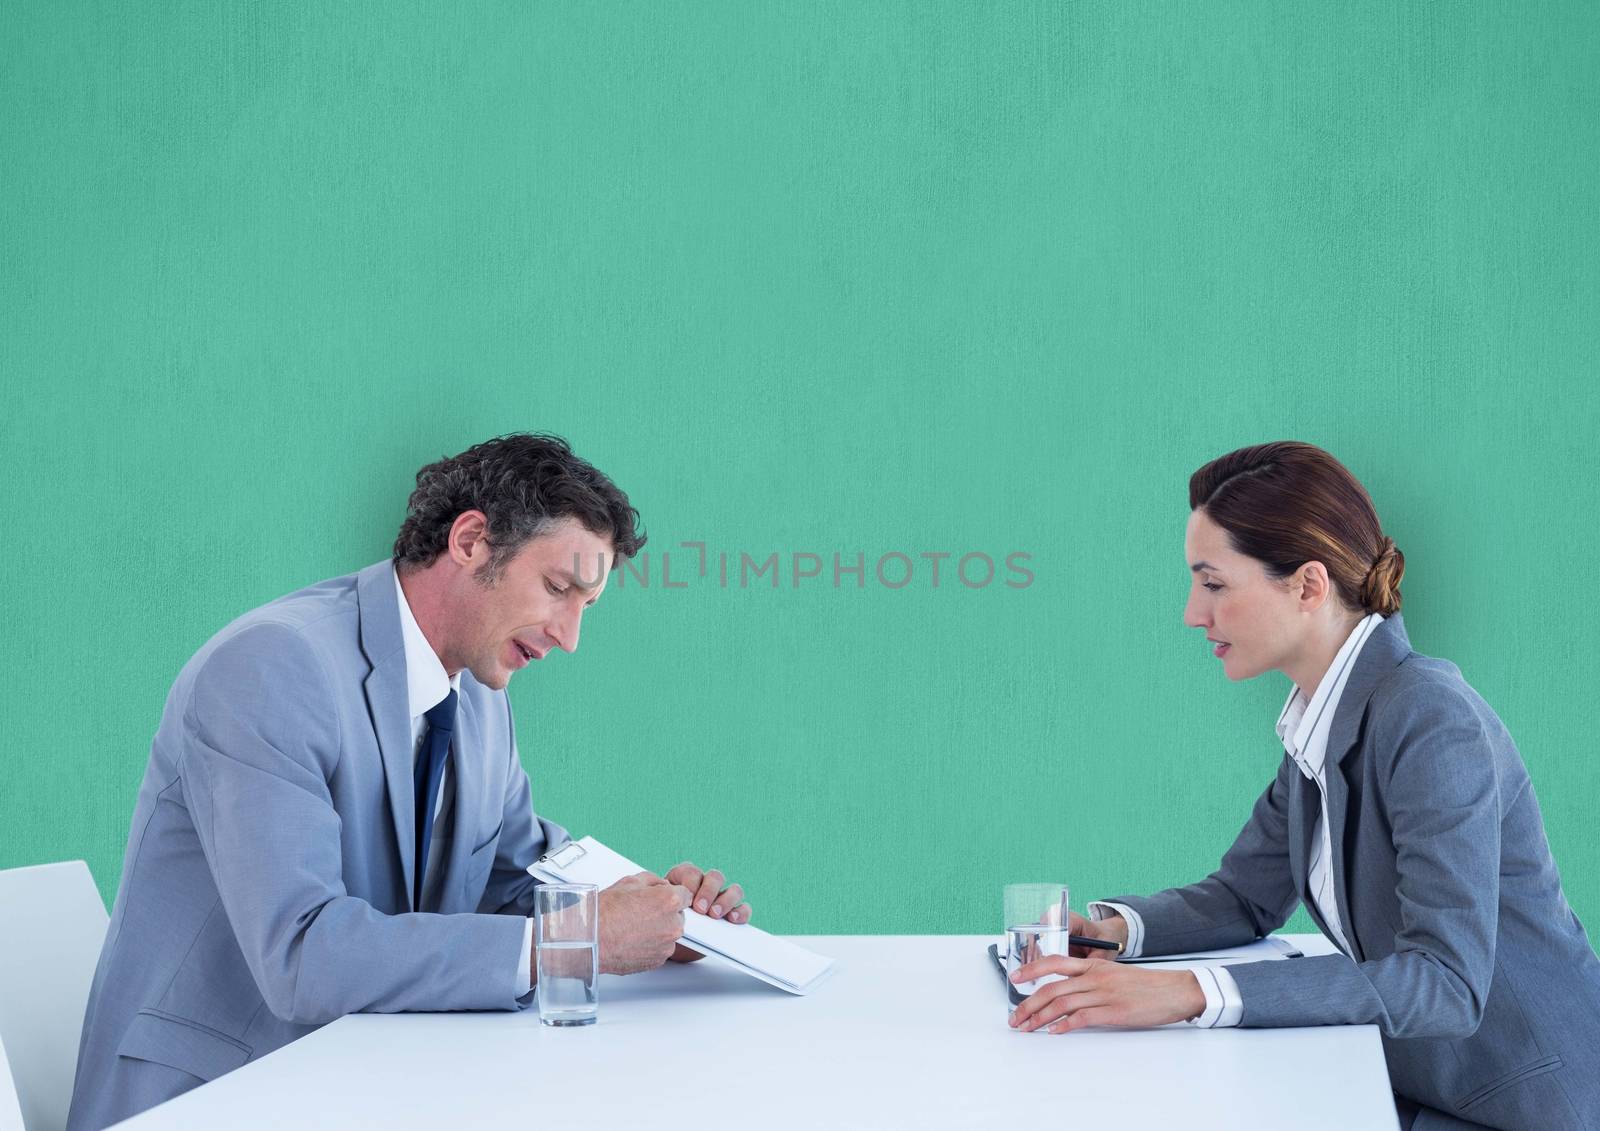 Digital composite of Business people discussing over documents